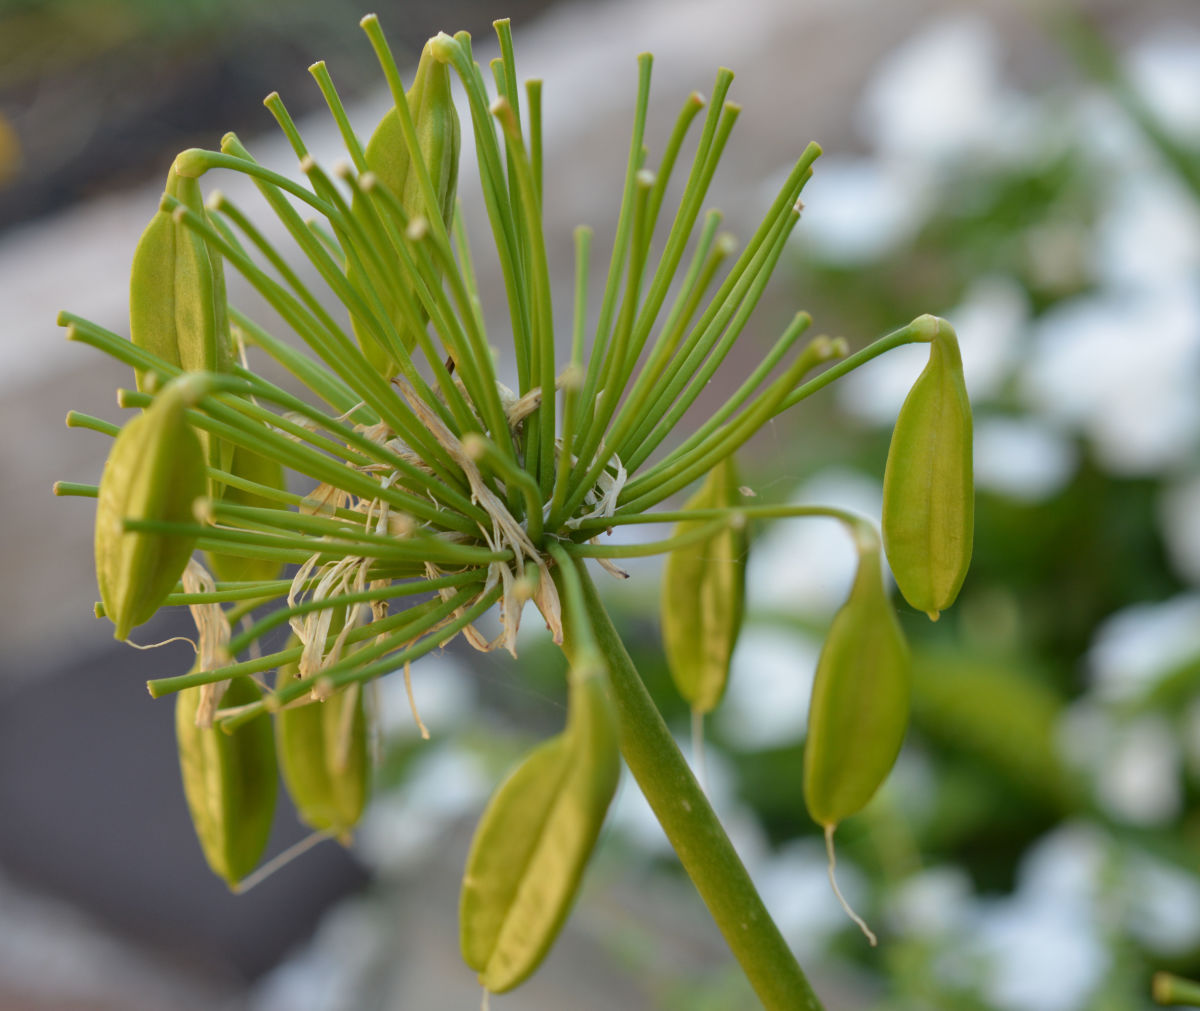 New (green) seed pods of spent Aggie blossoms